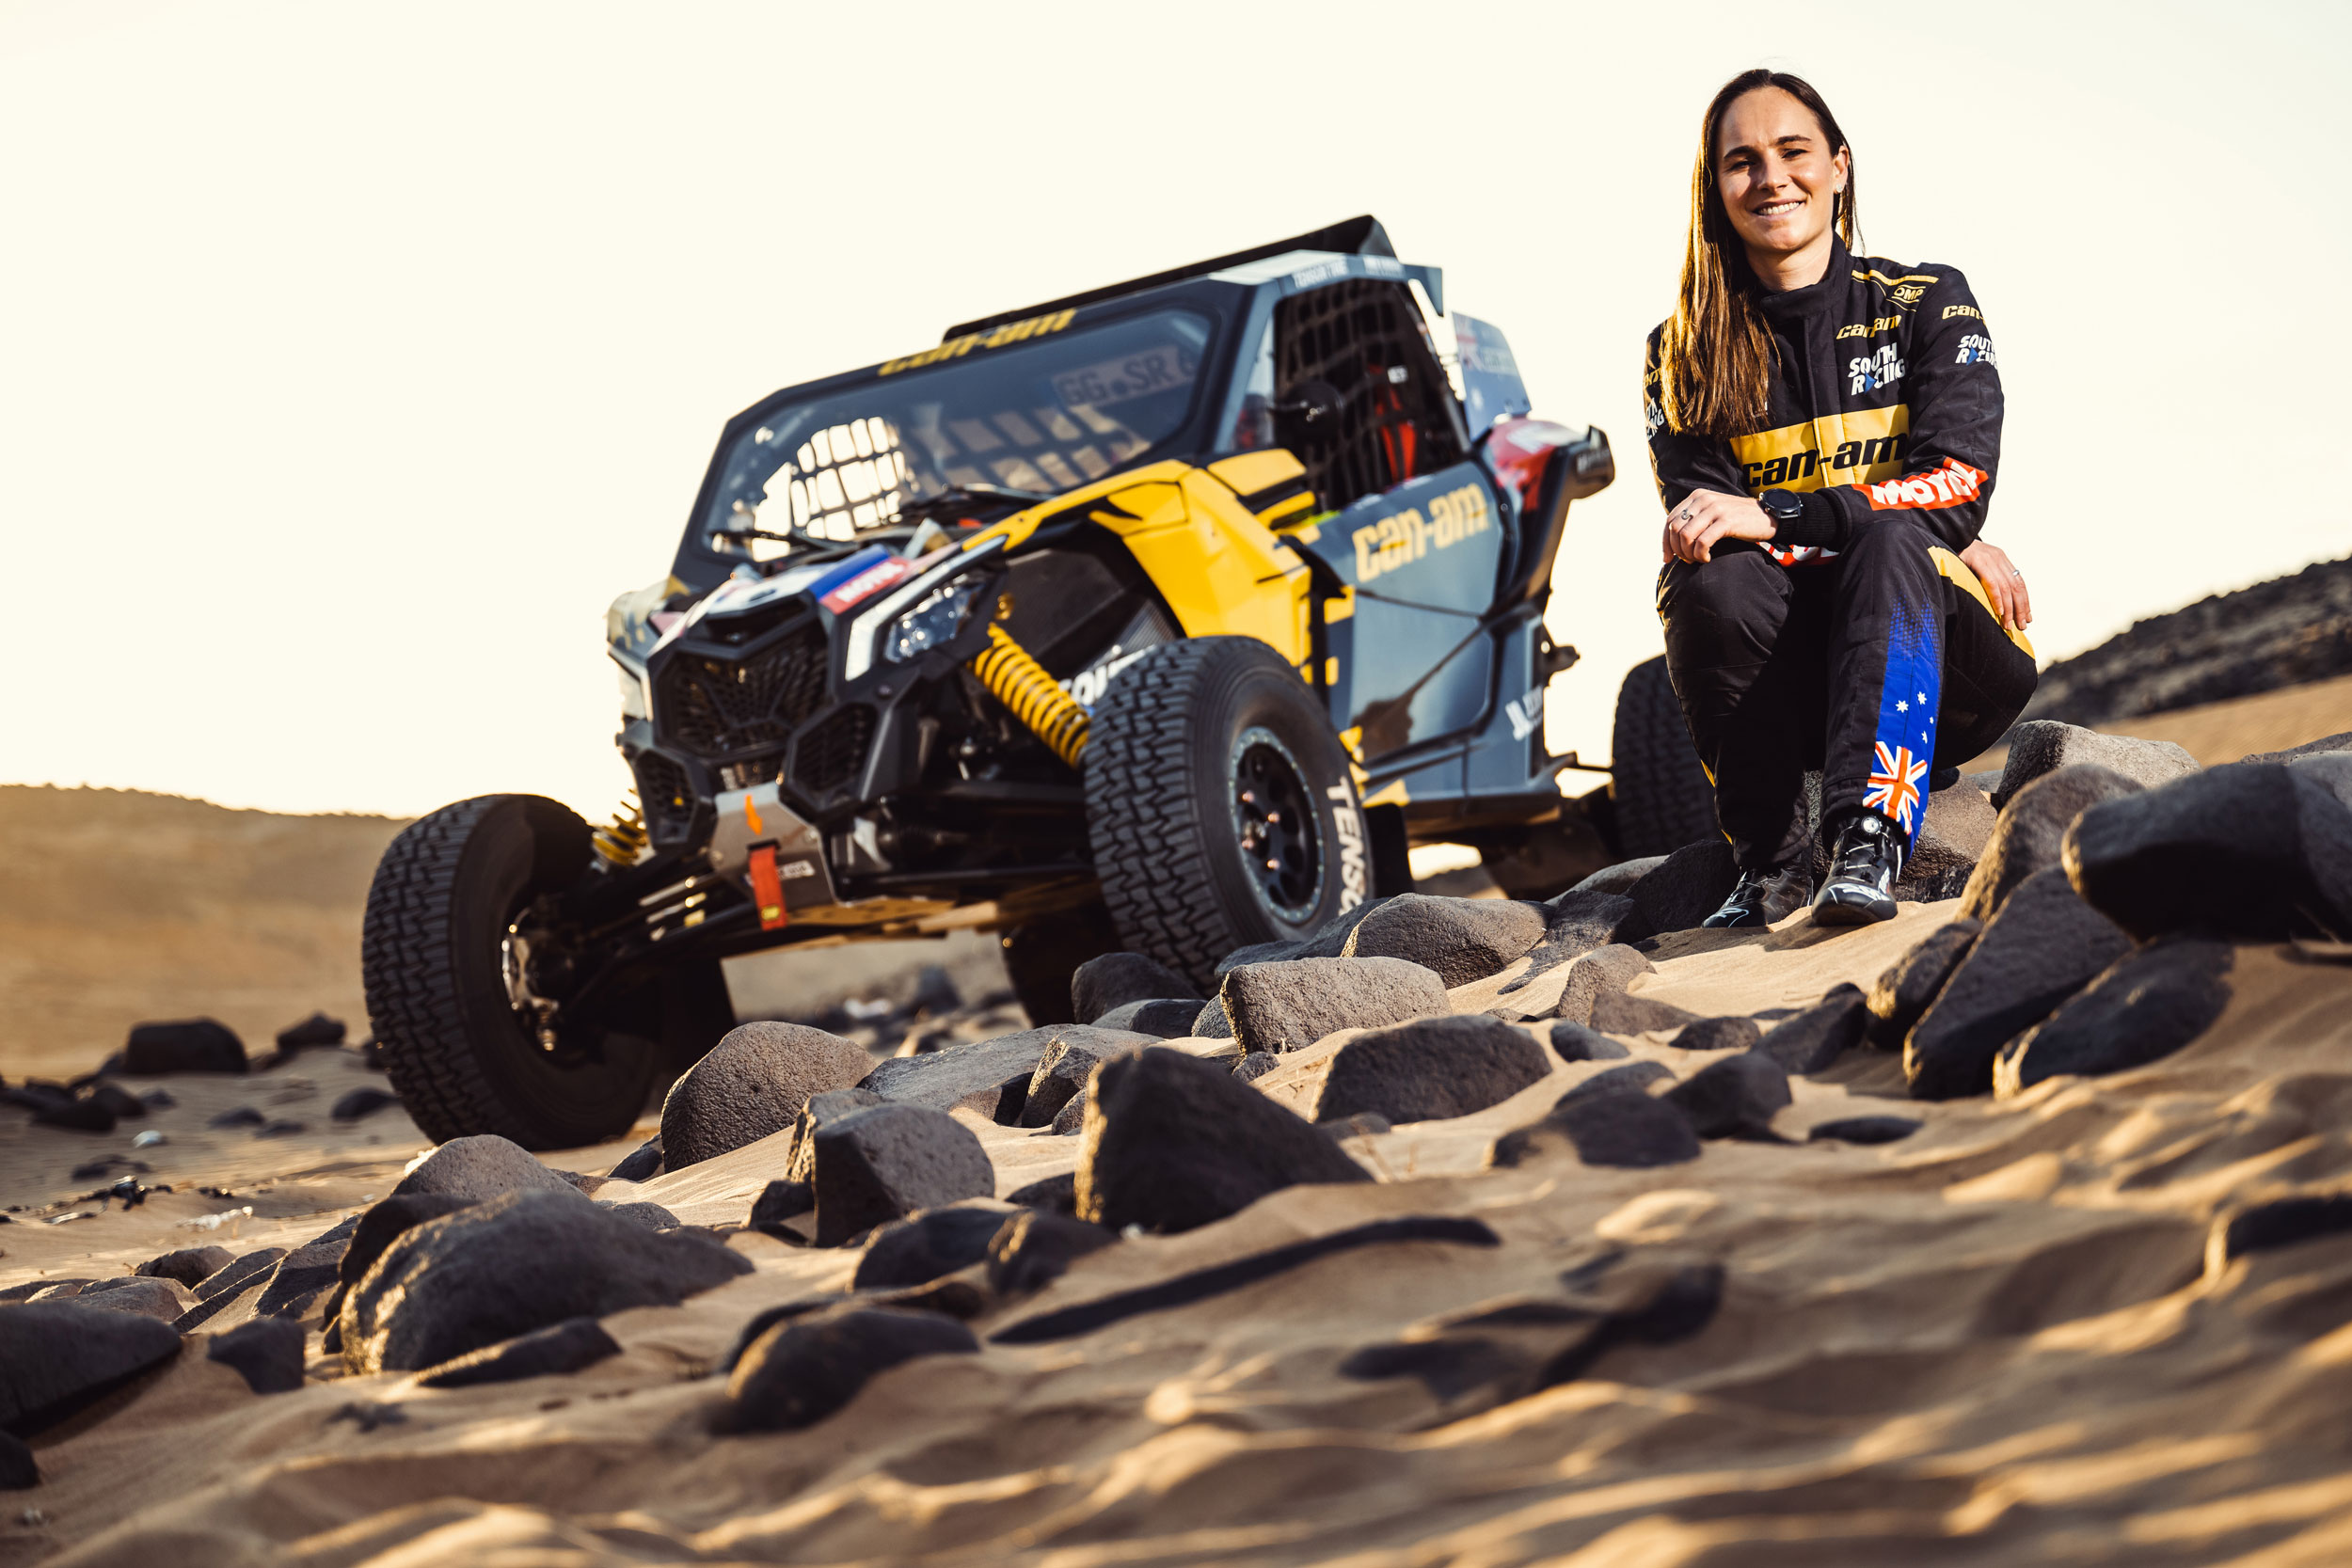 Molly Taylor with her Can-Am Maverick X3